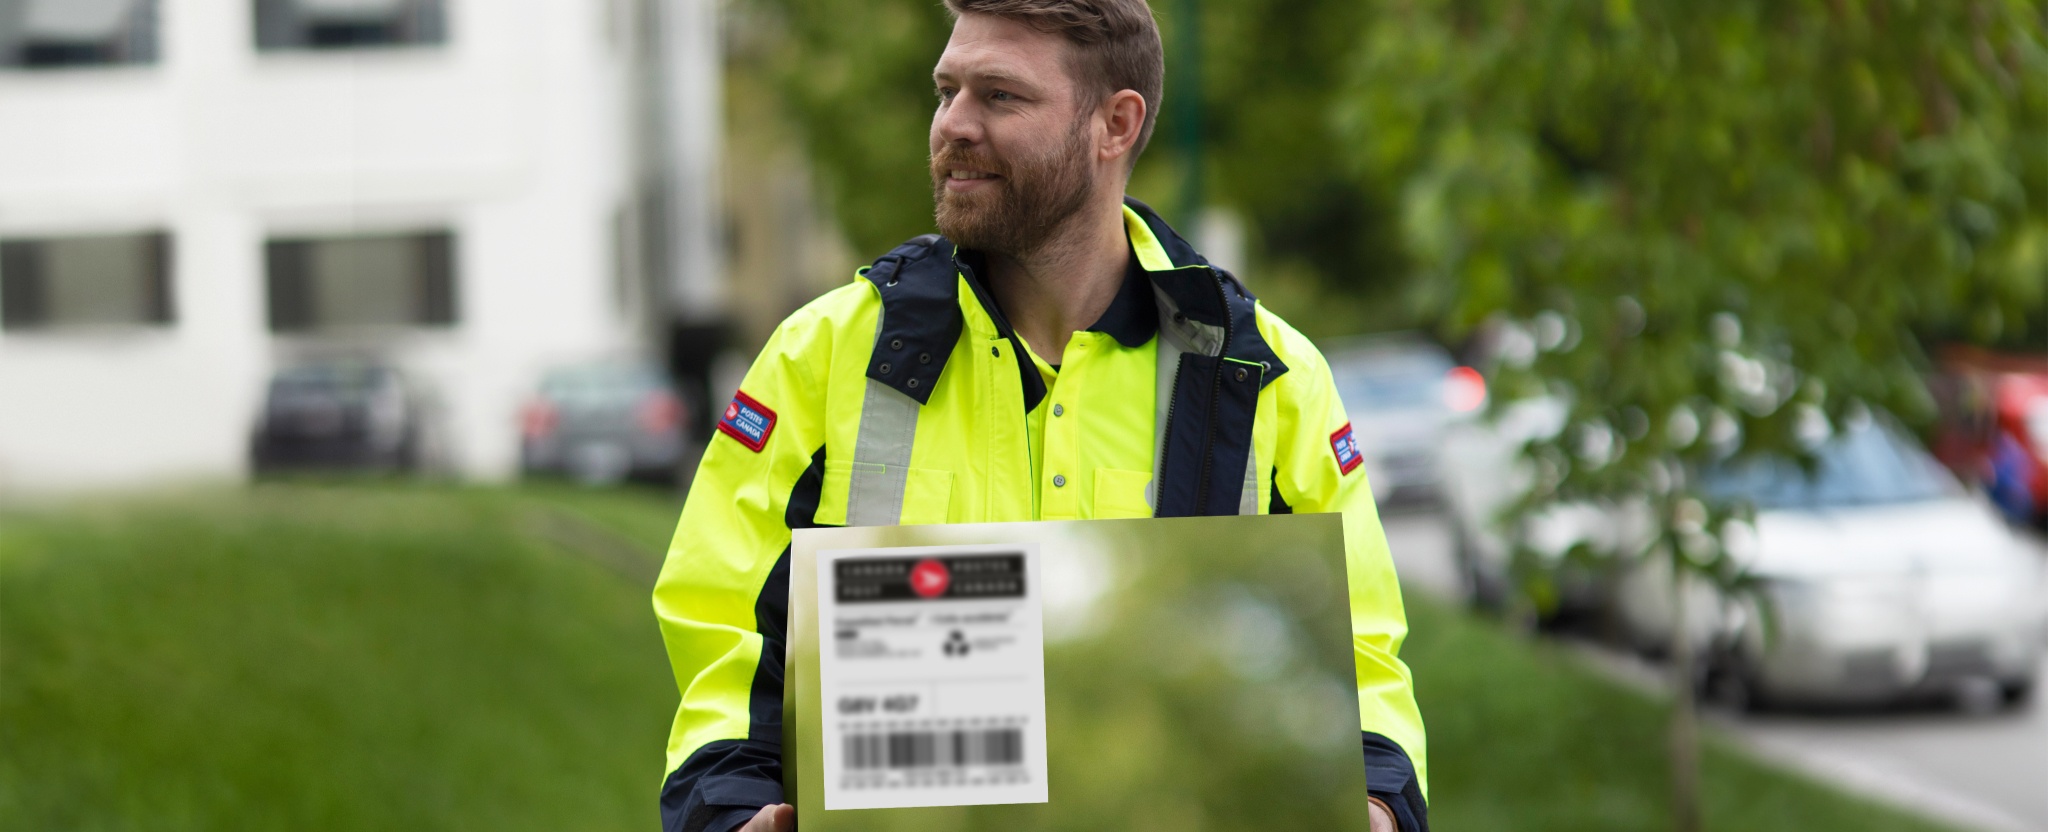 A Canada Post employee carries a carbon-neutral package for delivery.